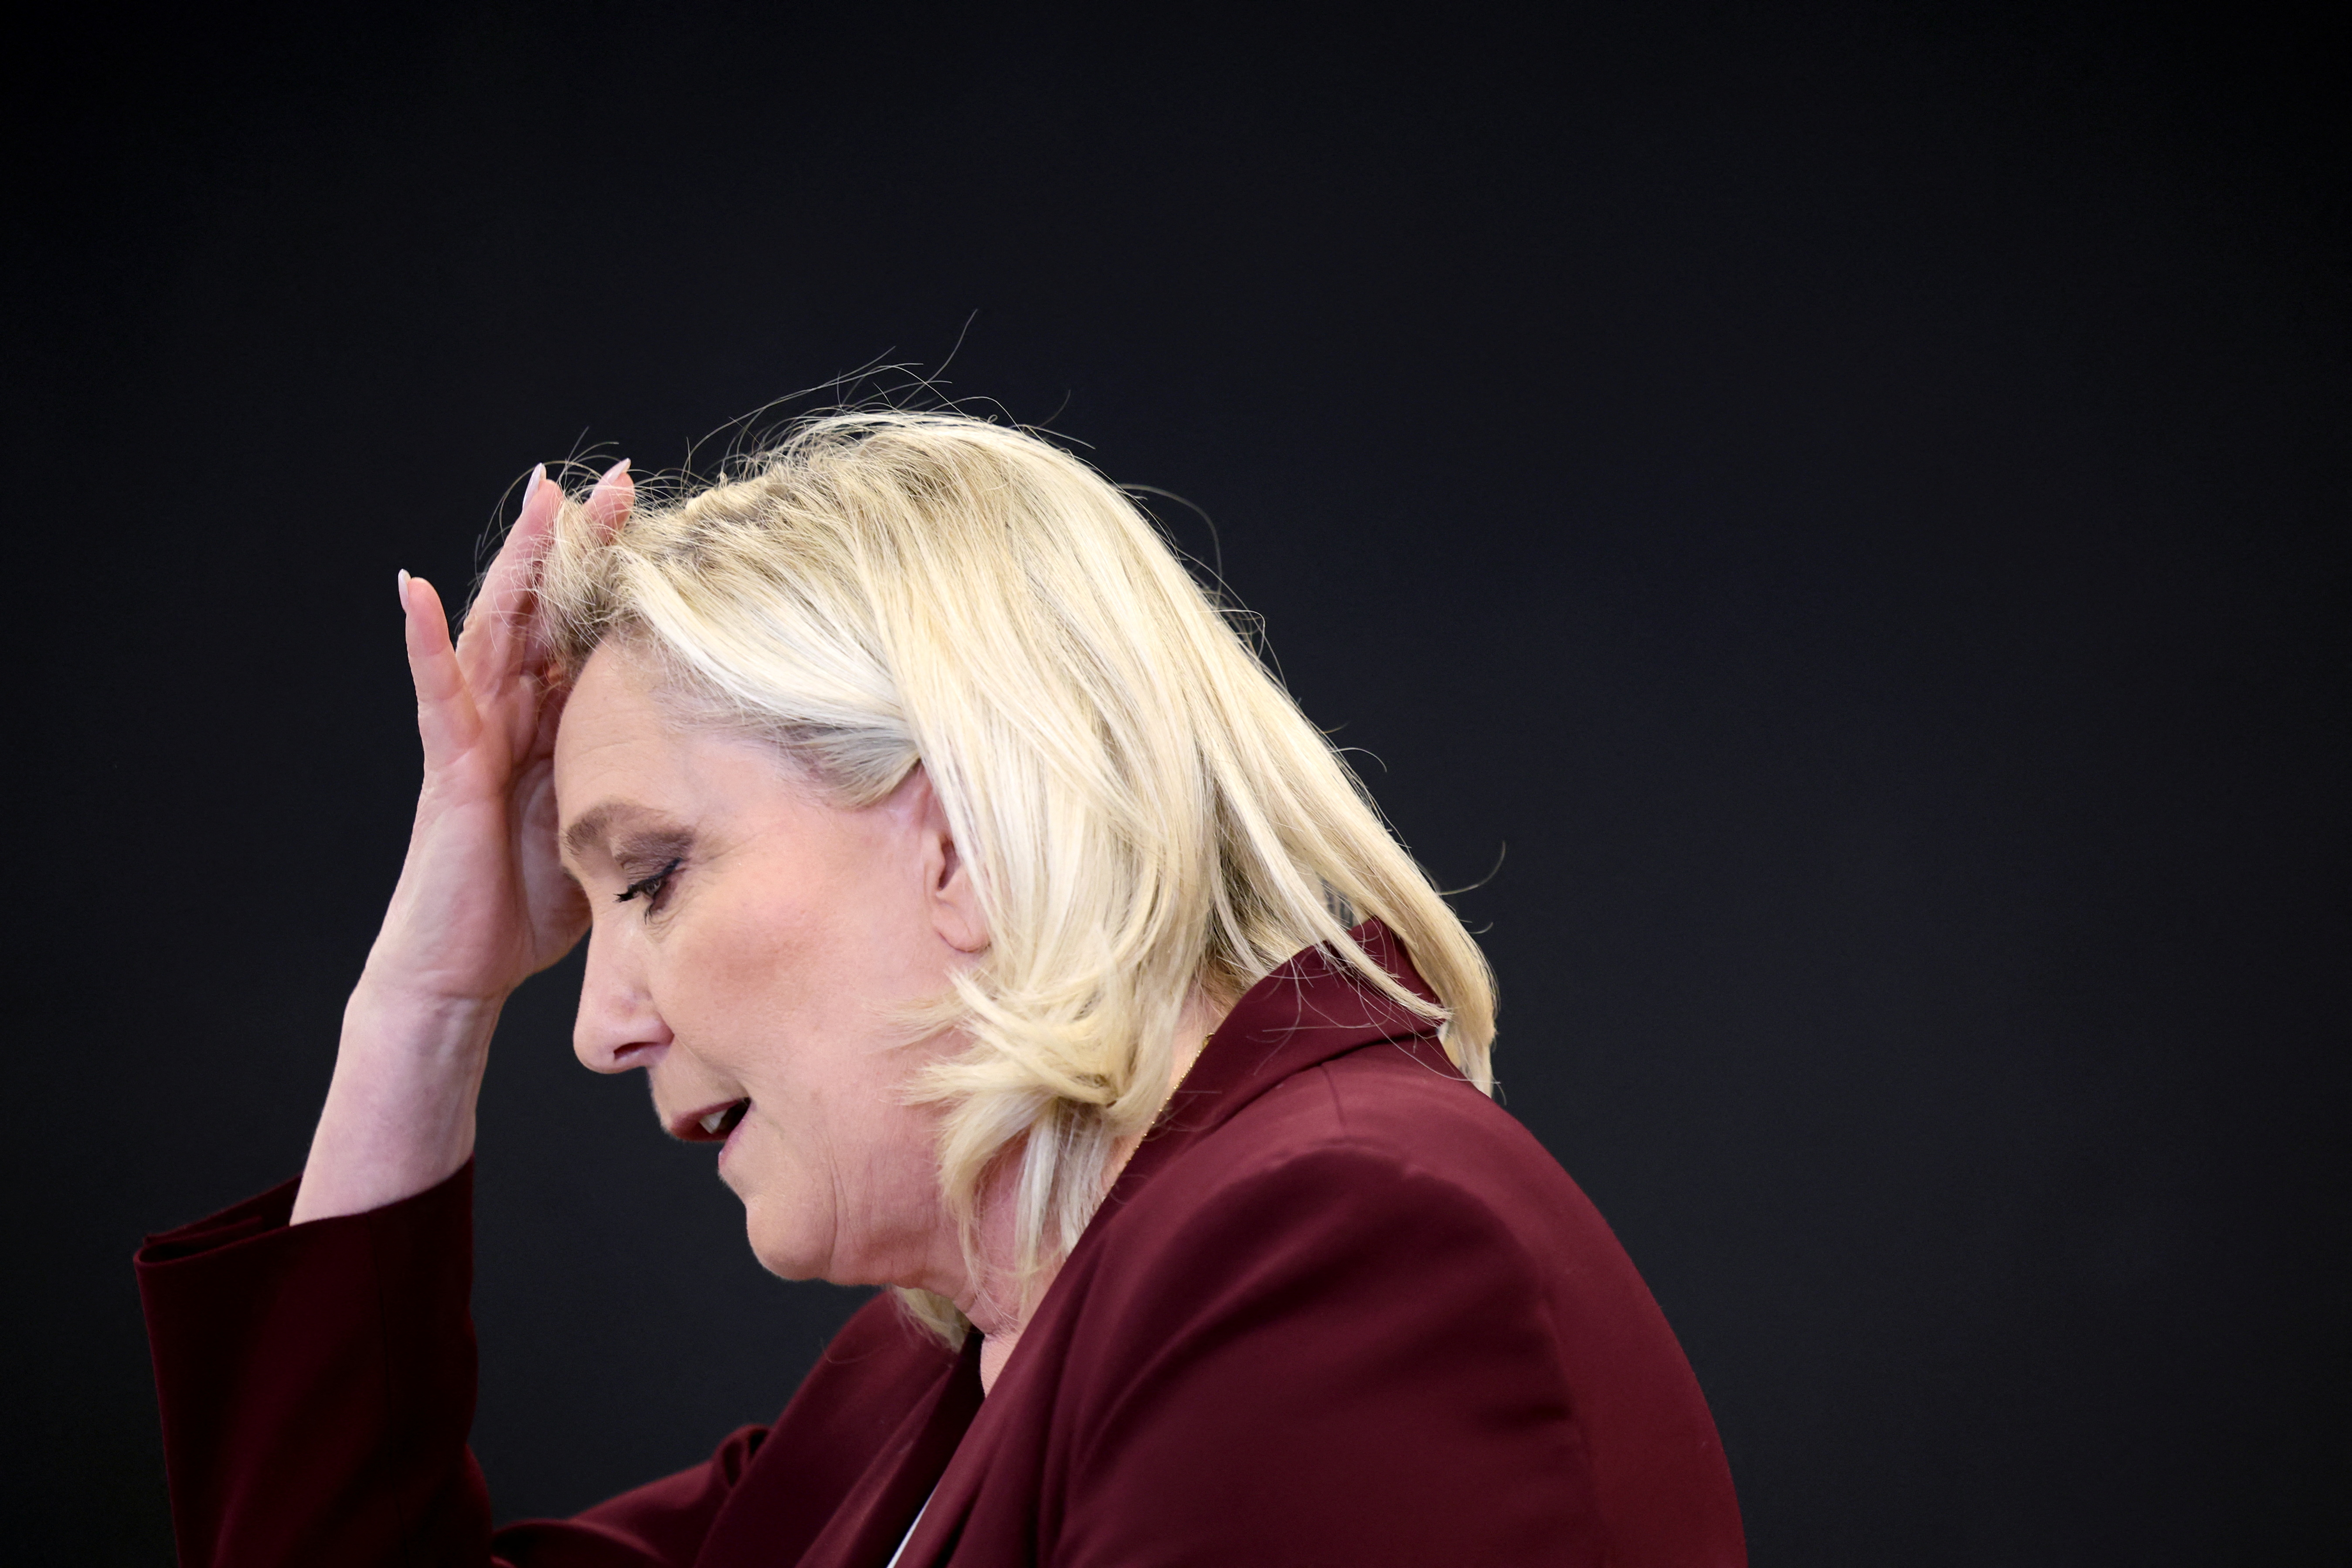 Marine Le Pen received loan from Hungarian bank with ties to